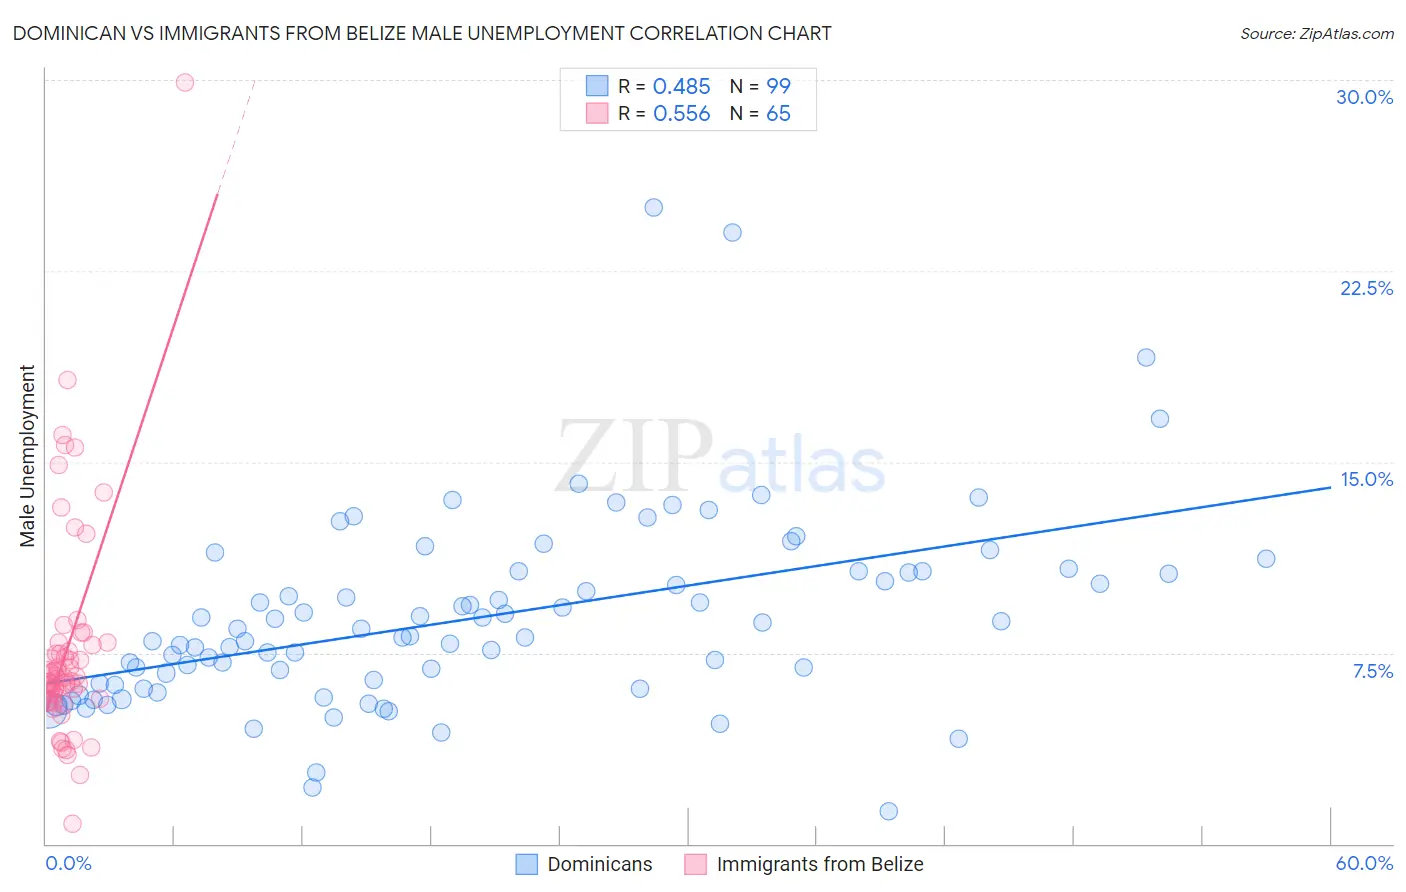 Dominican vs Immigrants from Belize Male Unemployment